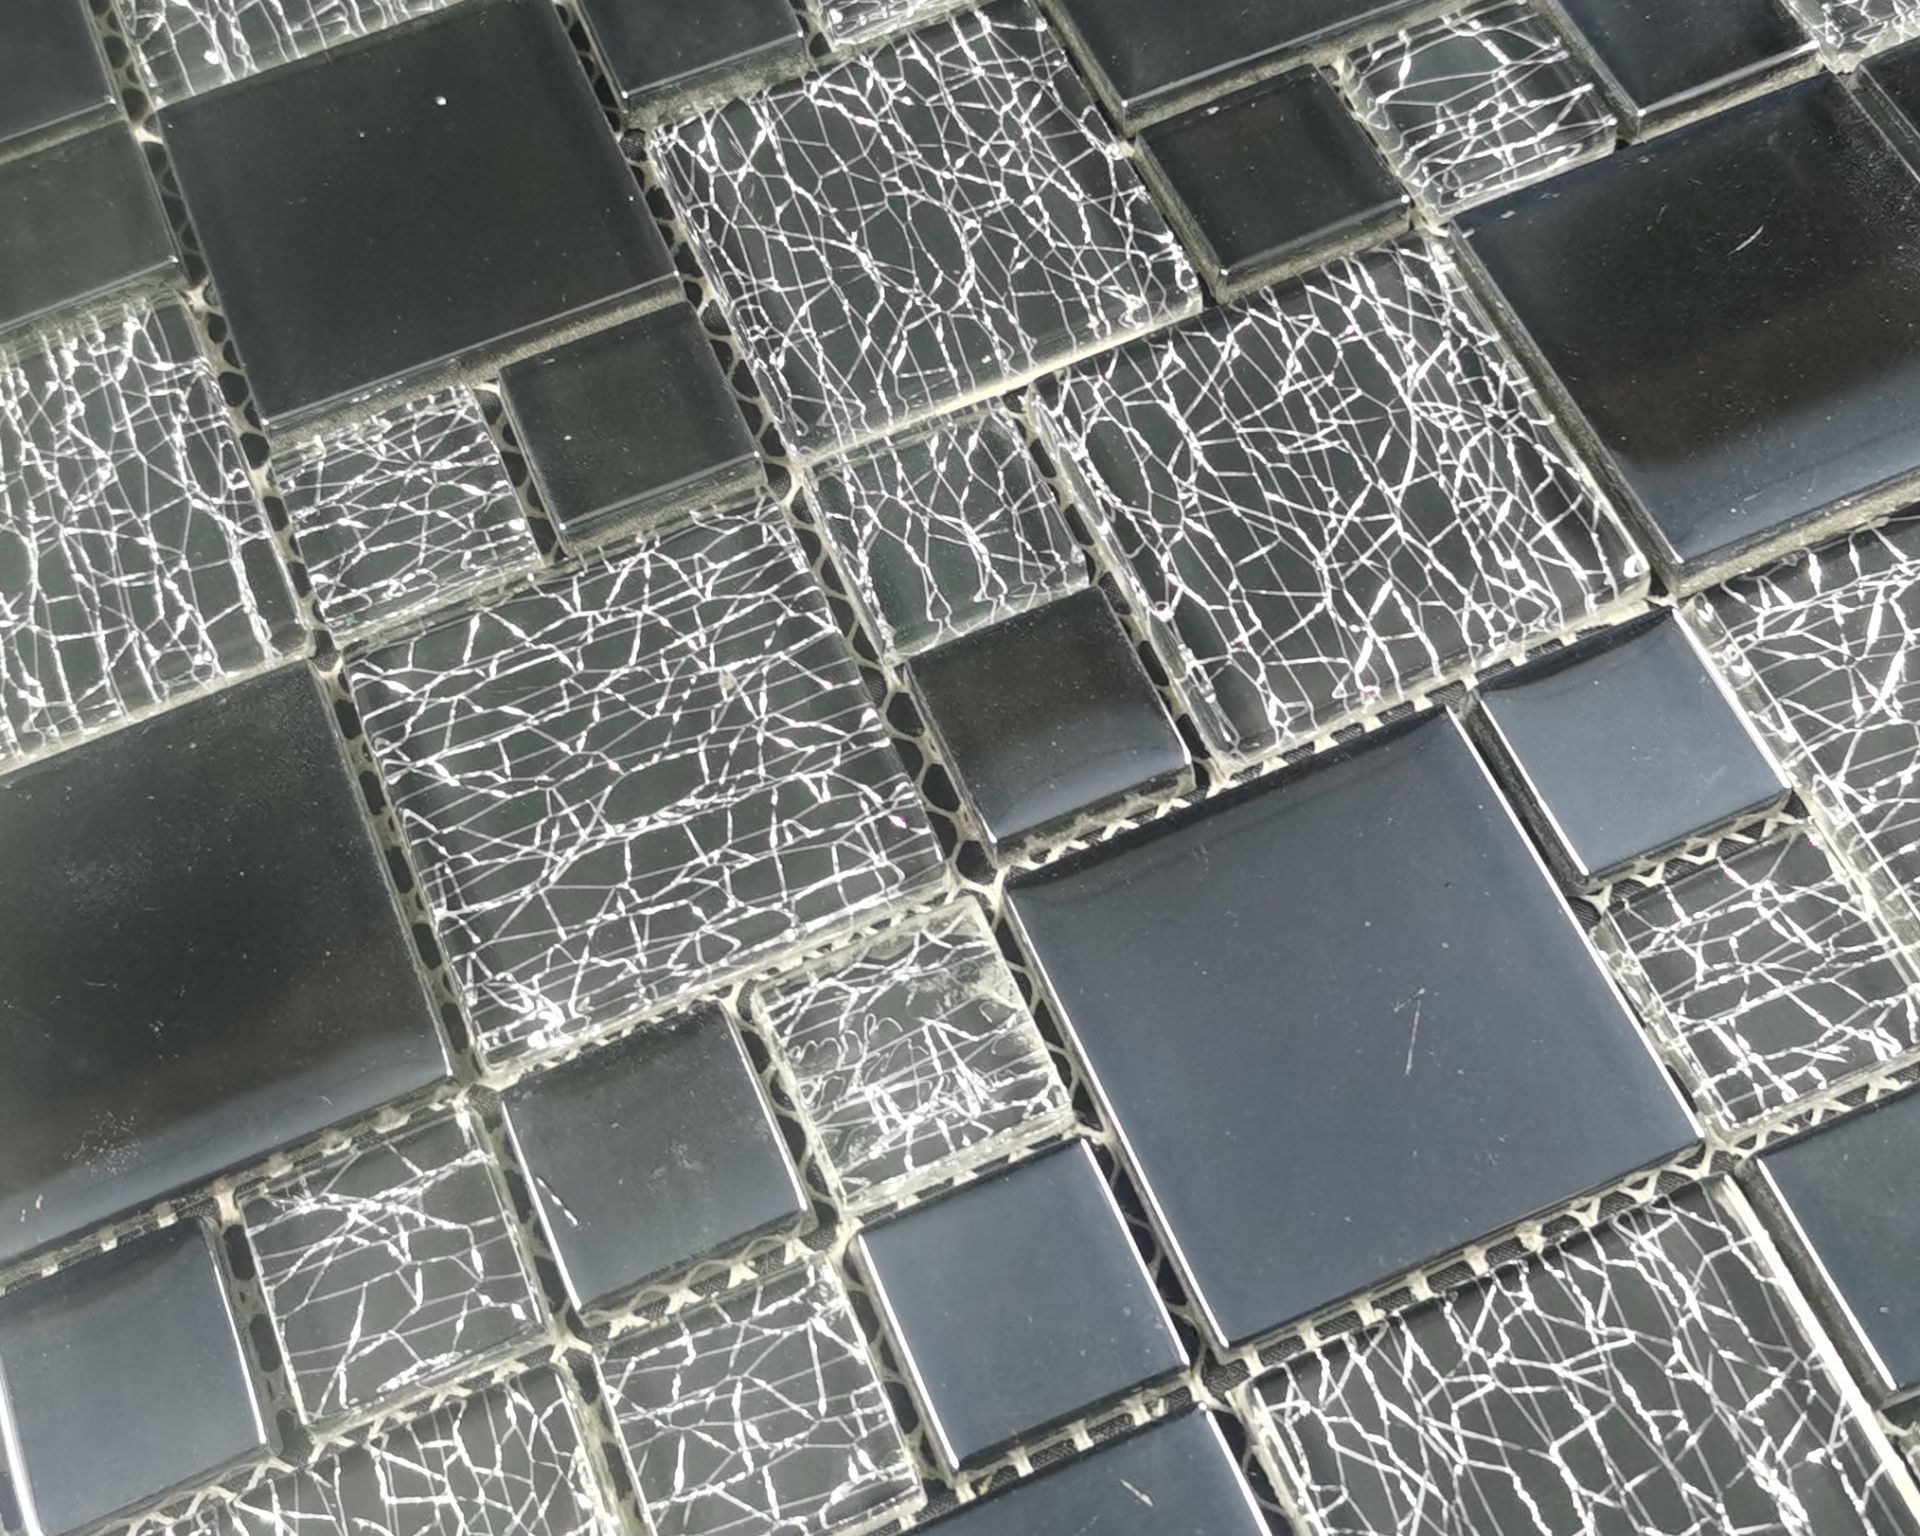 10 Square Metres - High Quality Glass/Stainless Steel Mosaic Tiles -110 sheets - Image 4 of 5